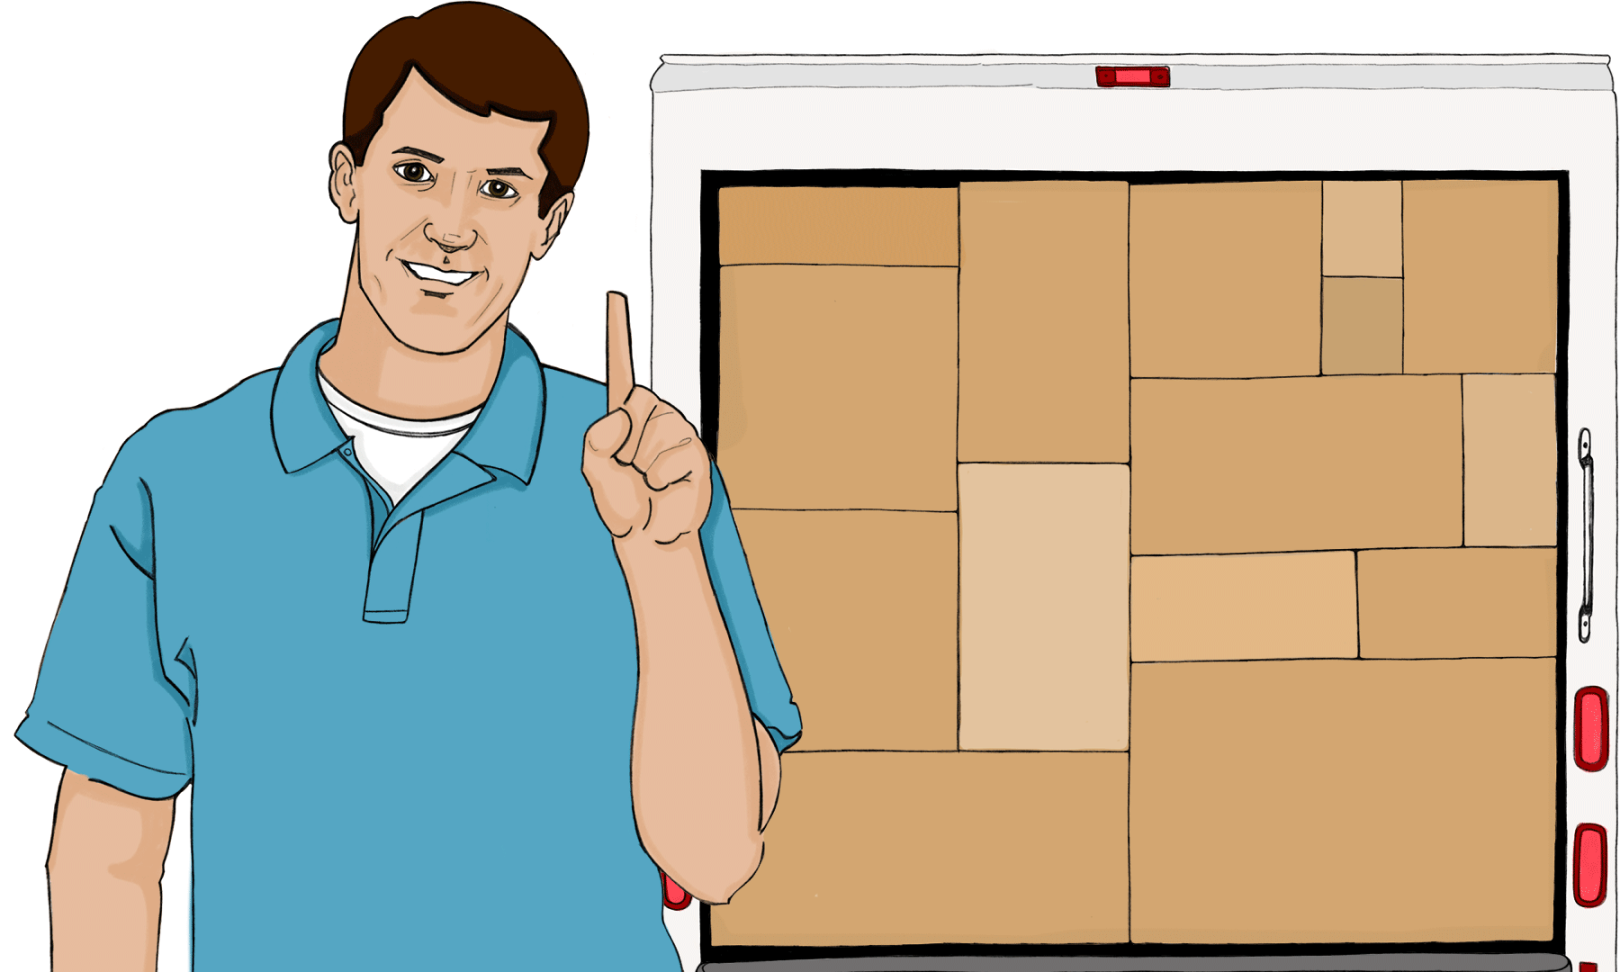 Man holding up finger standing in front of moving truc